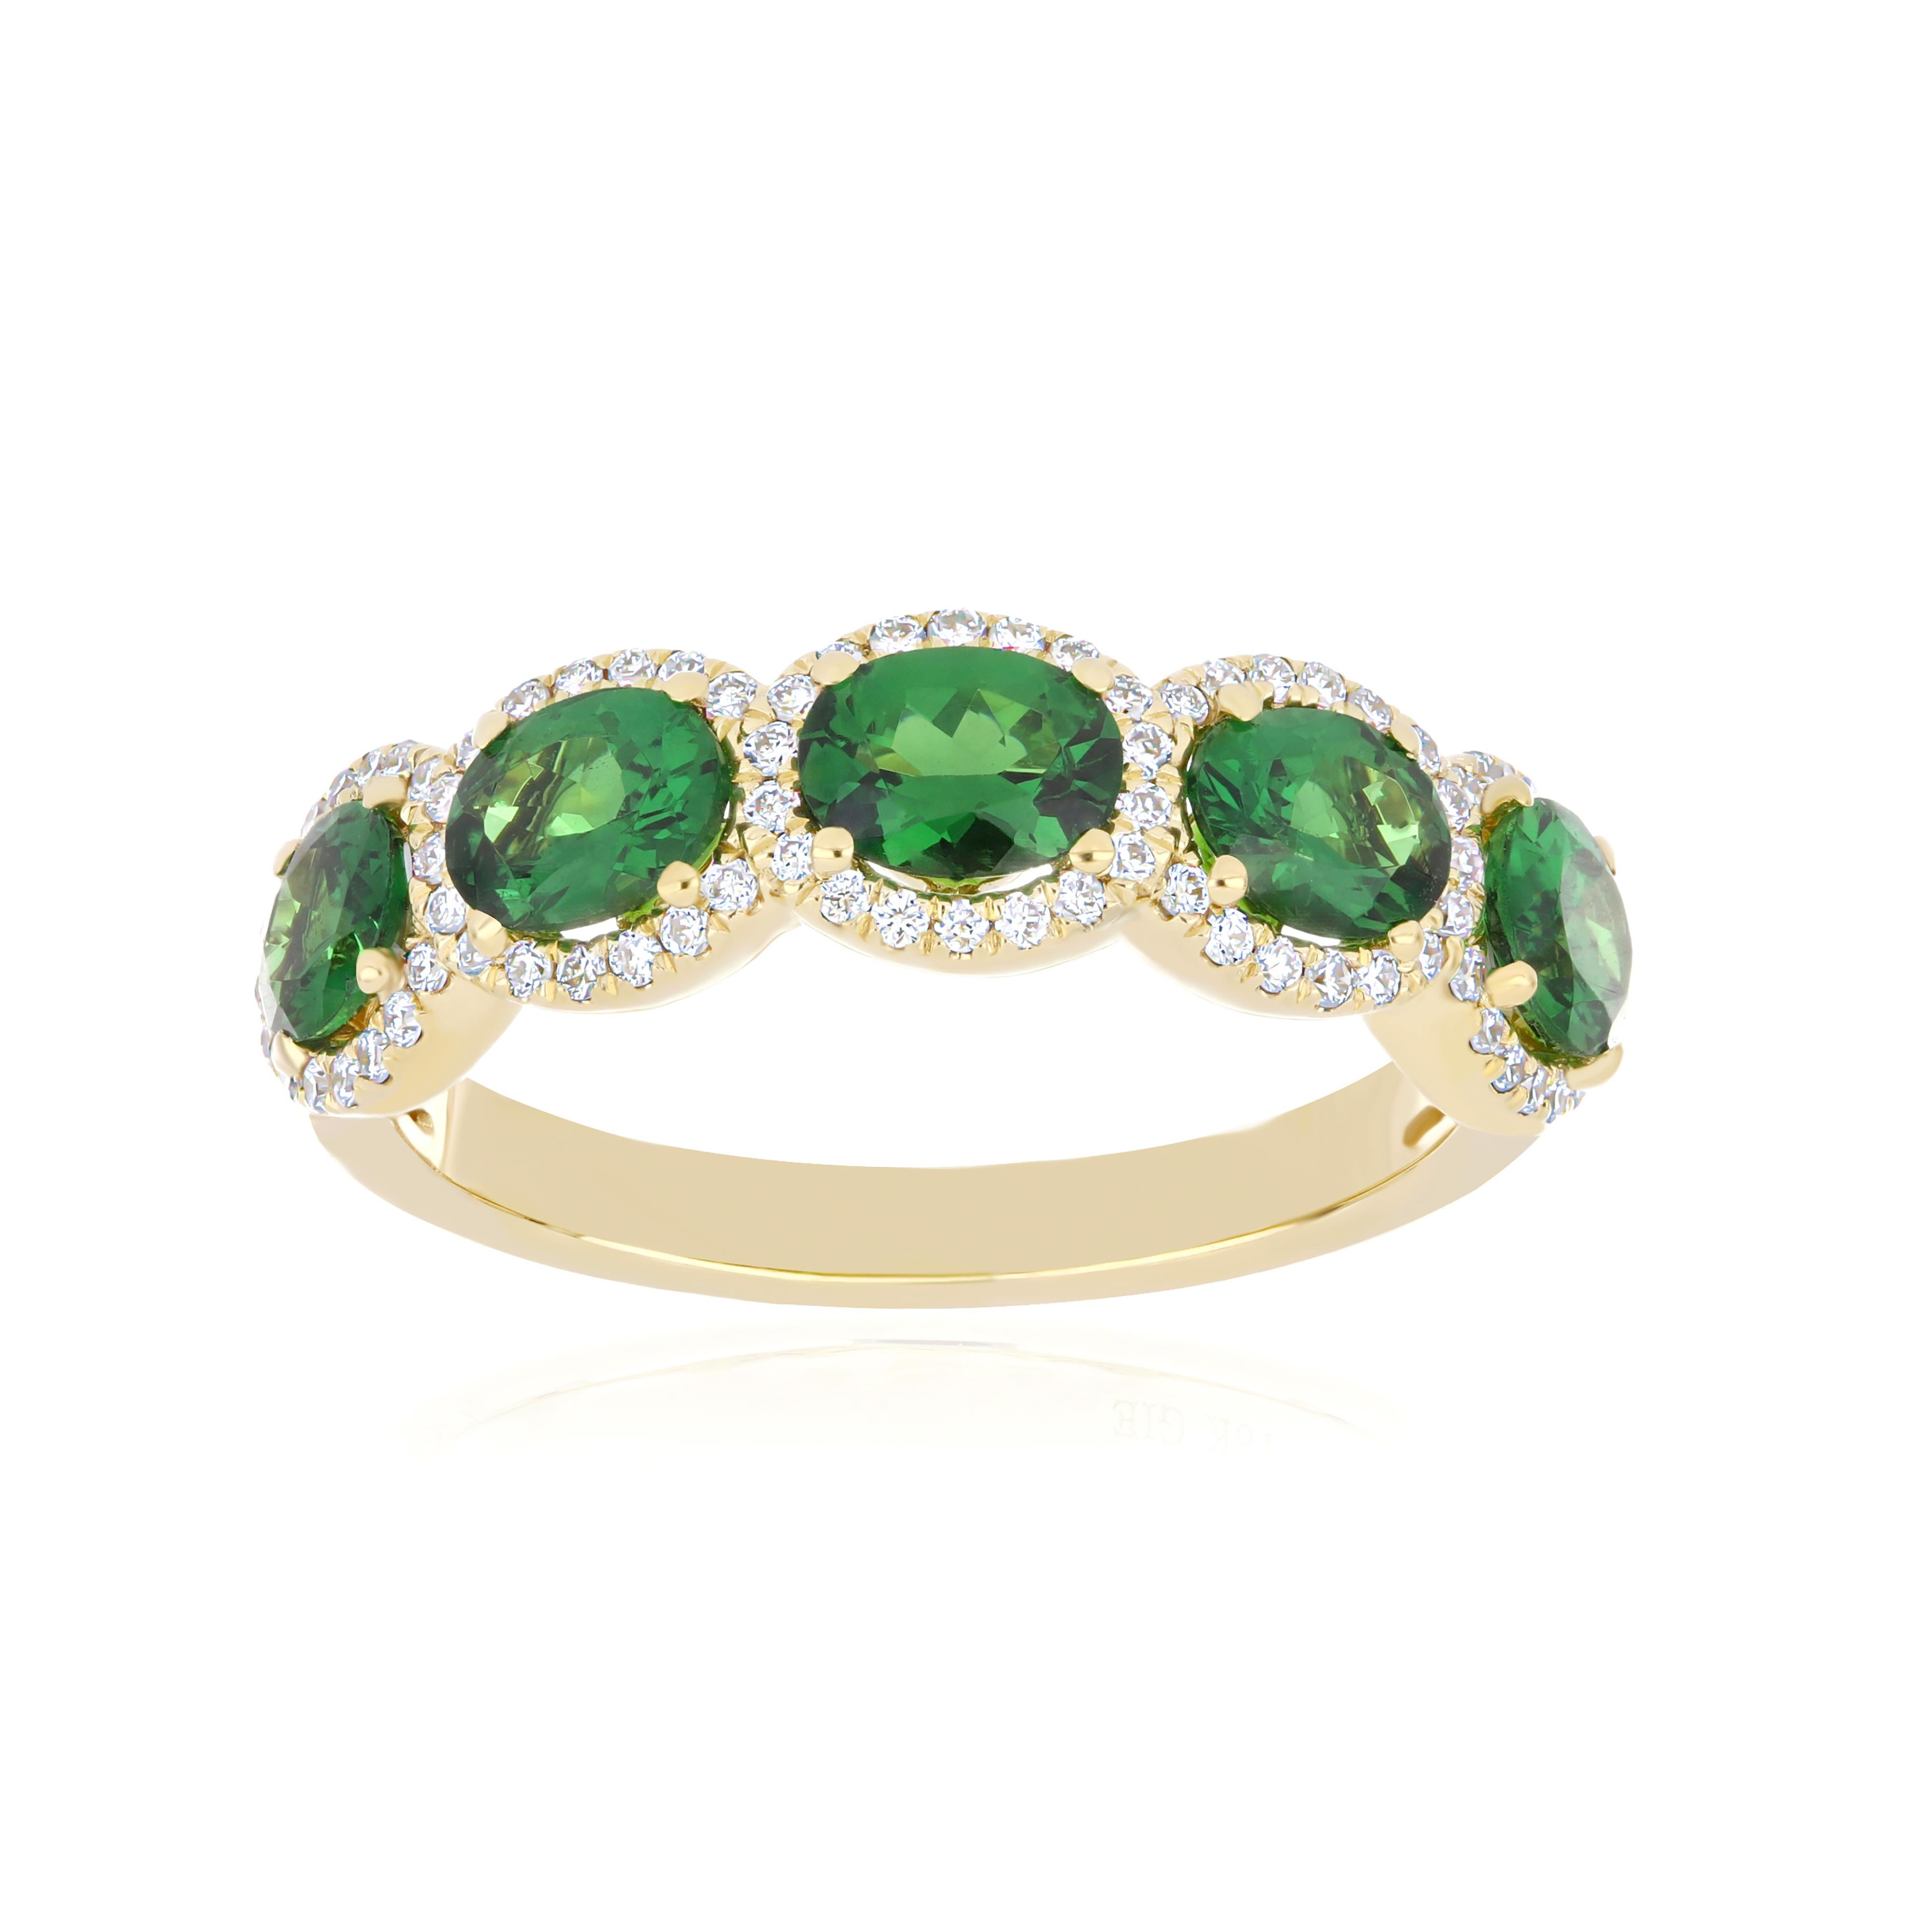 Elegant and Exquisitely detailed Yellow Gold Ring, with a rare 1.85 Cts (approx.) Oval Shape Faceted Cut Tsavorite set in the center beautifully accented with Micro pave set Diamonds, weighing approx. 0.25 CT's (approx.). total carat weight to